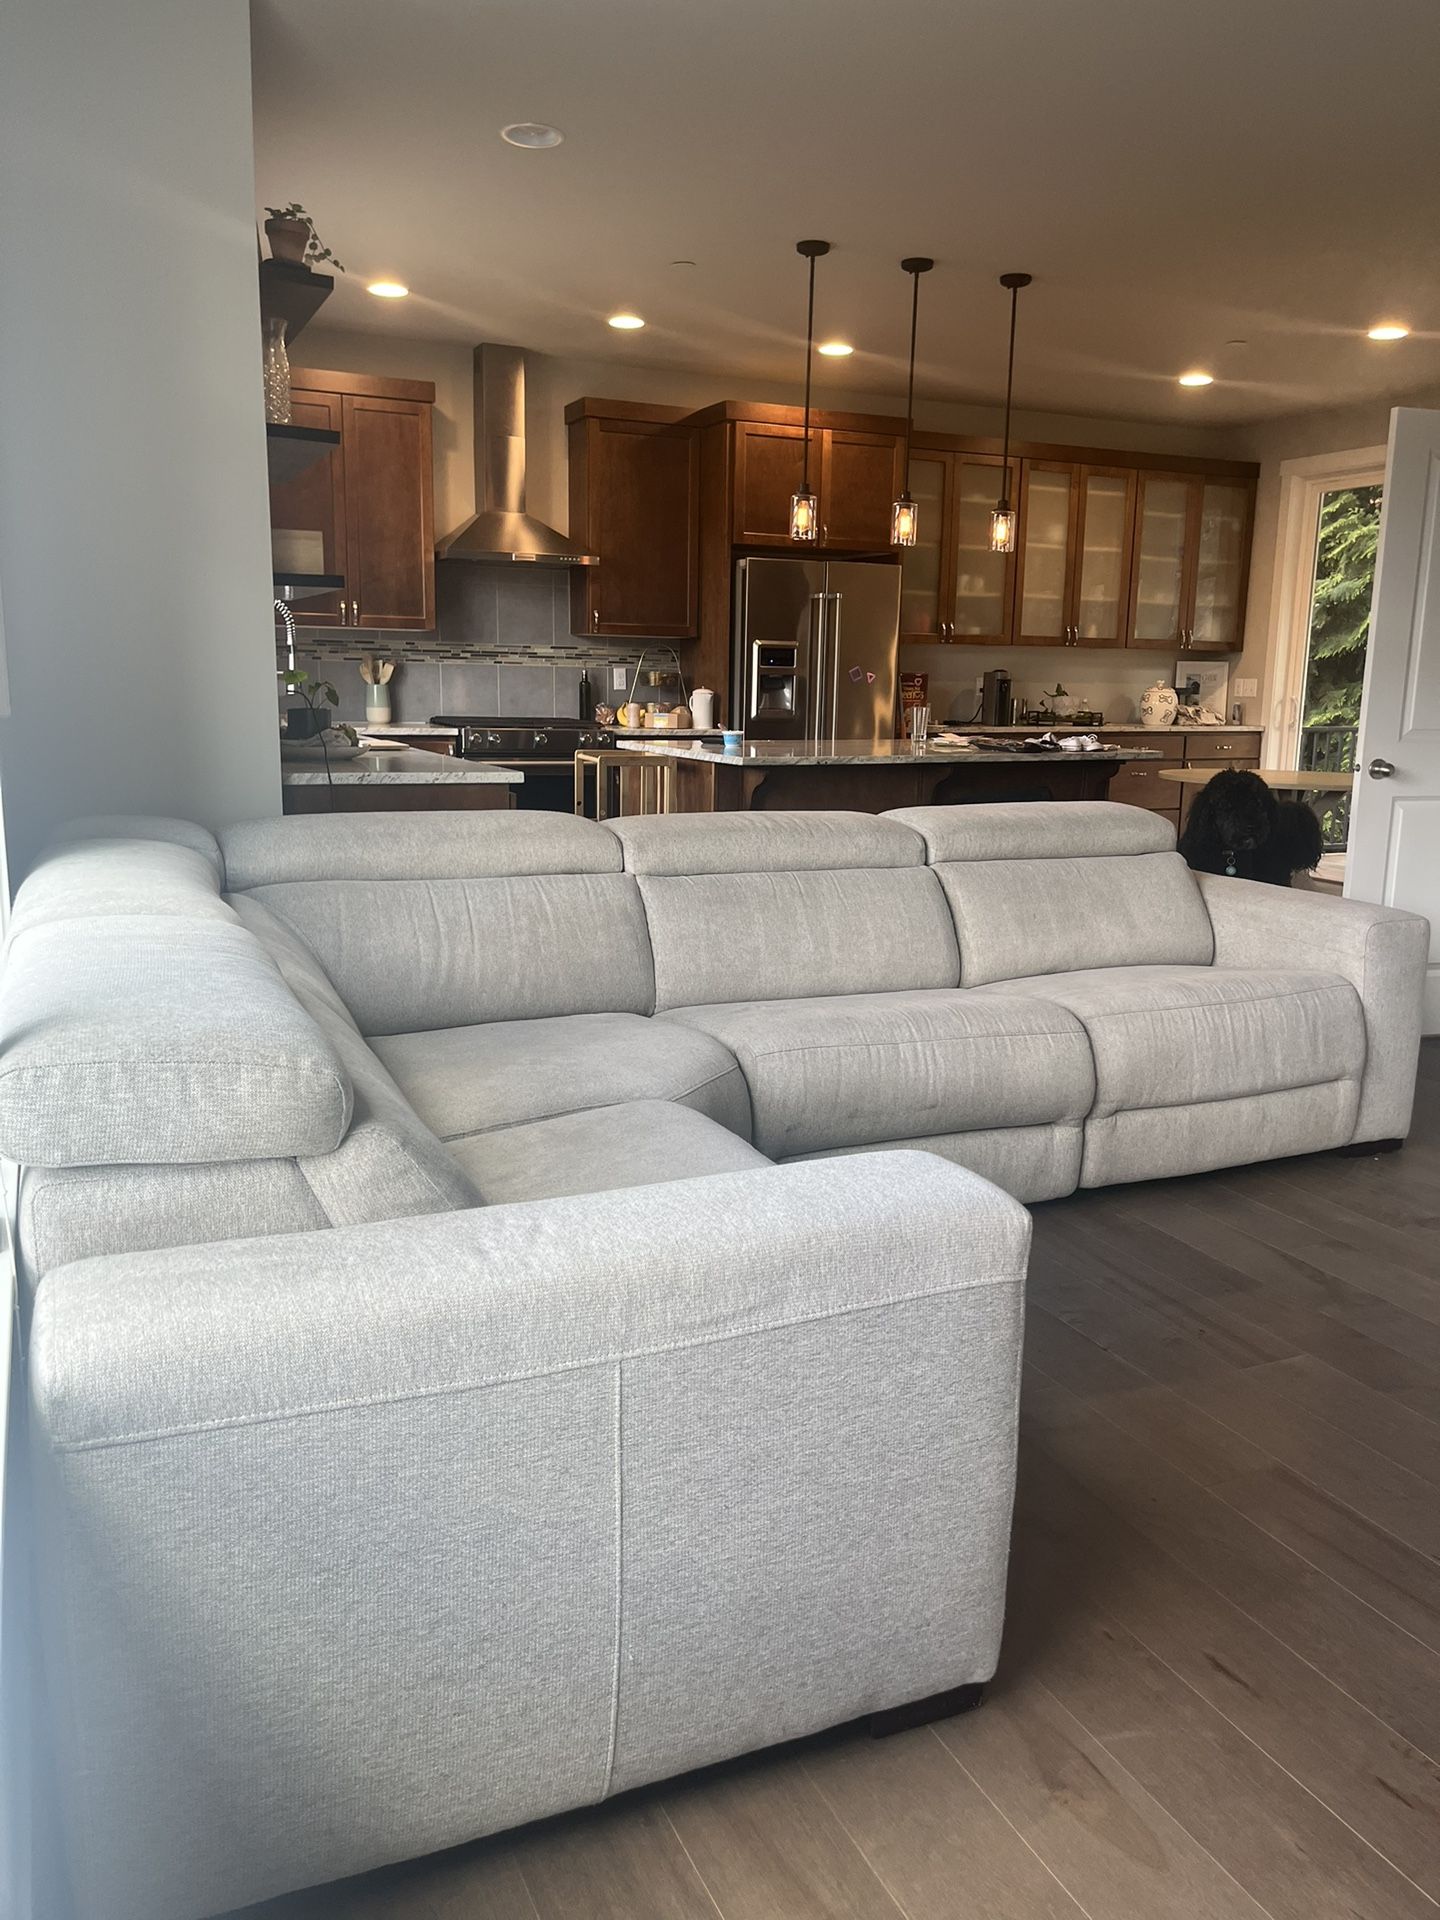 Recliner sectional 